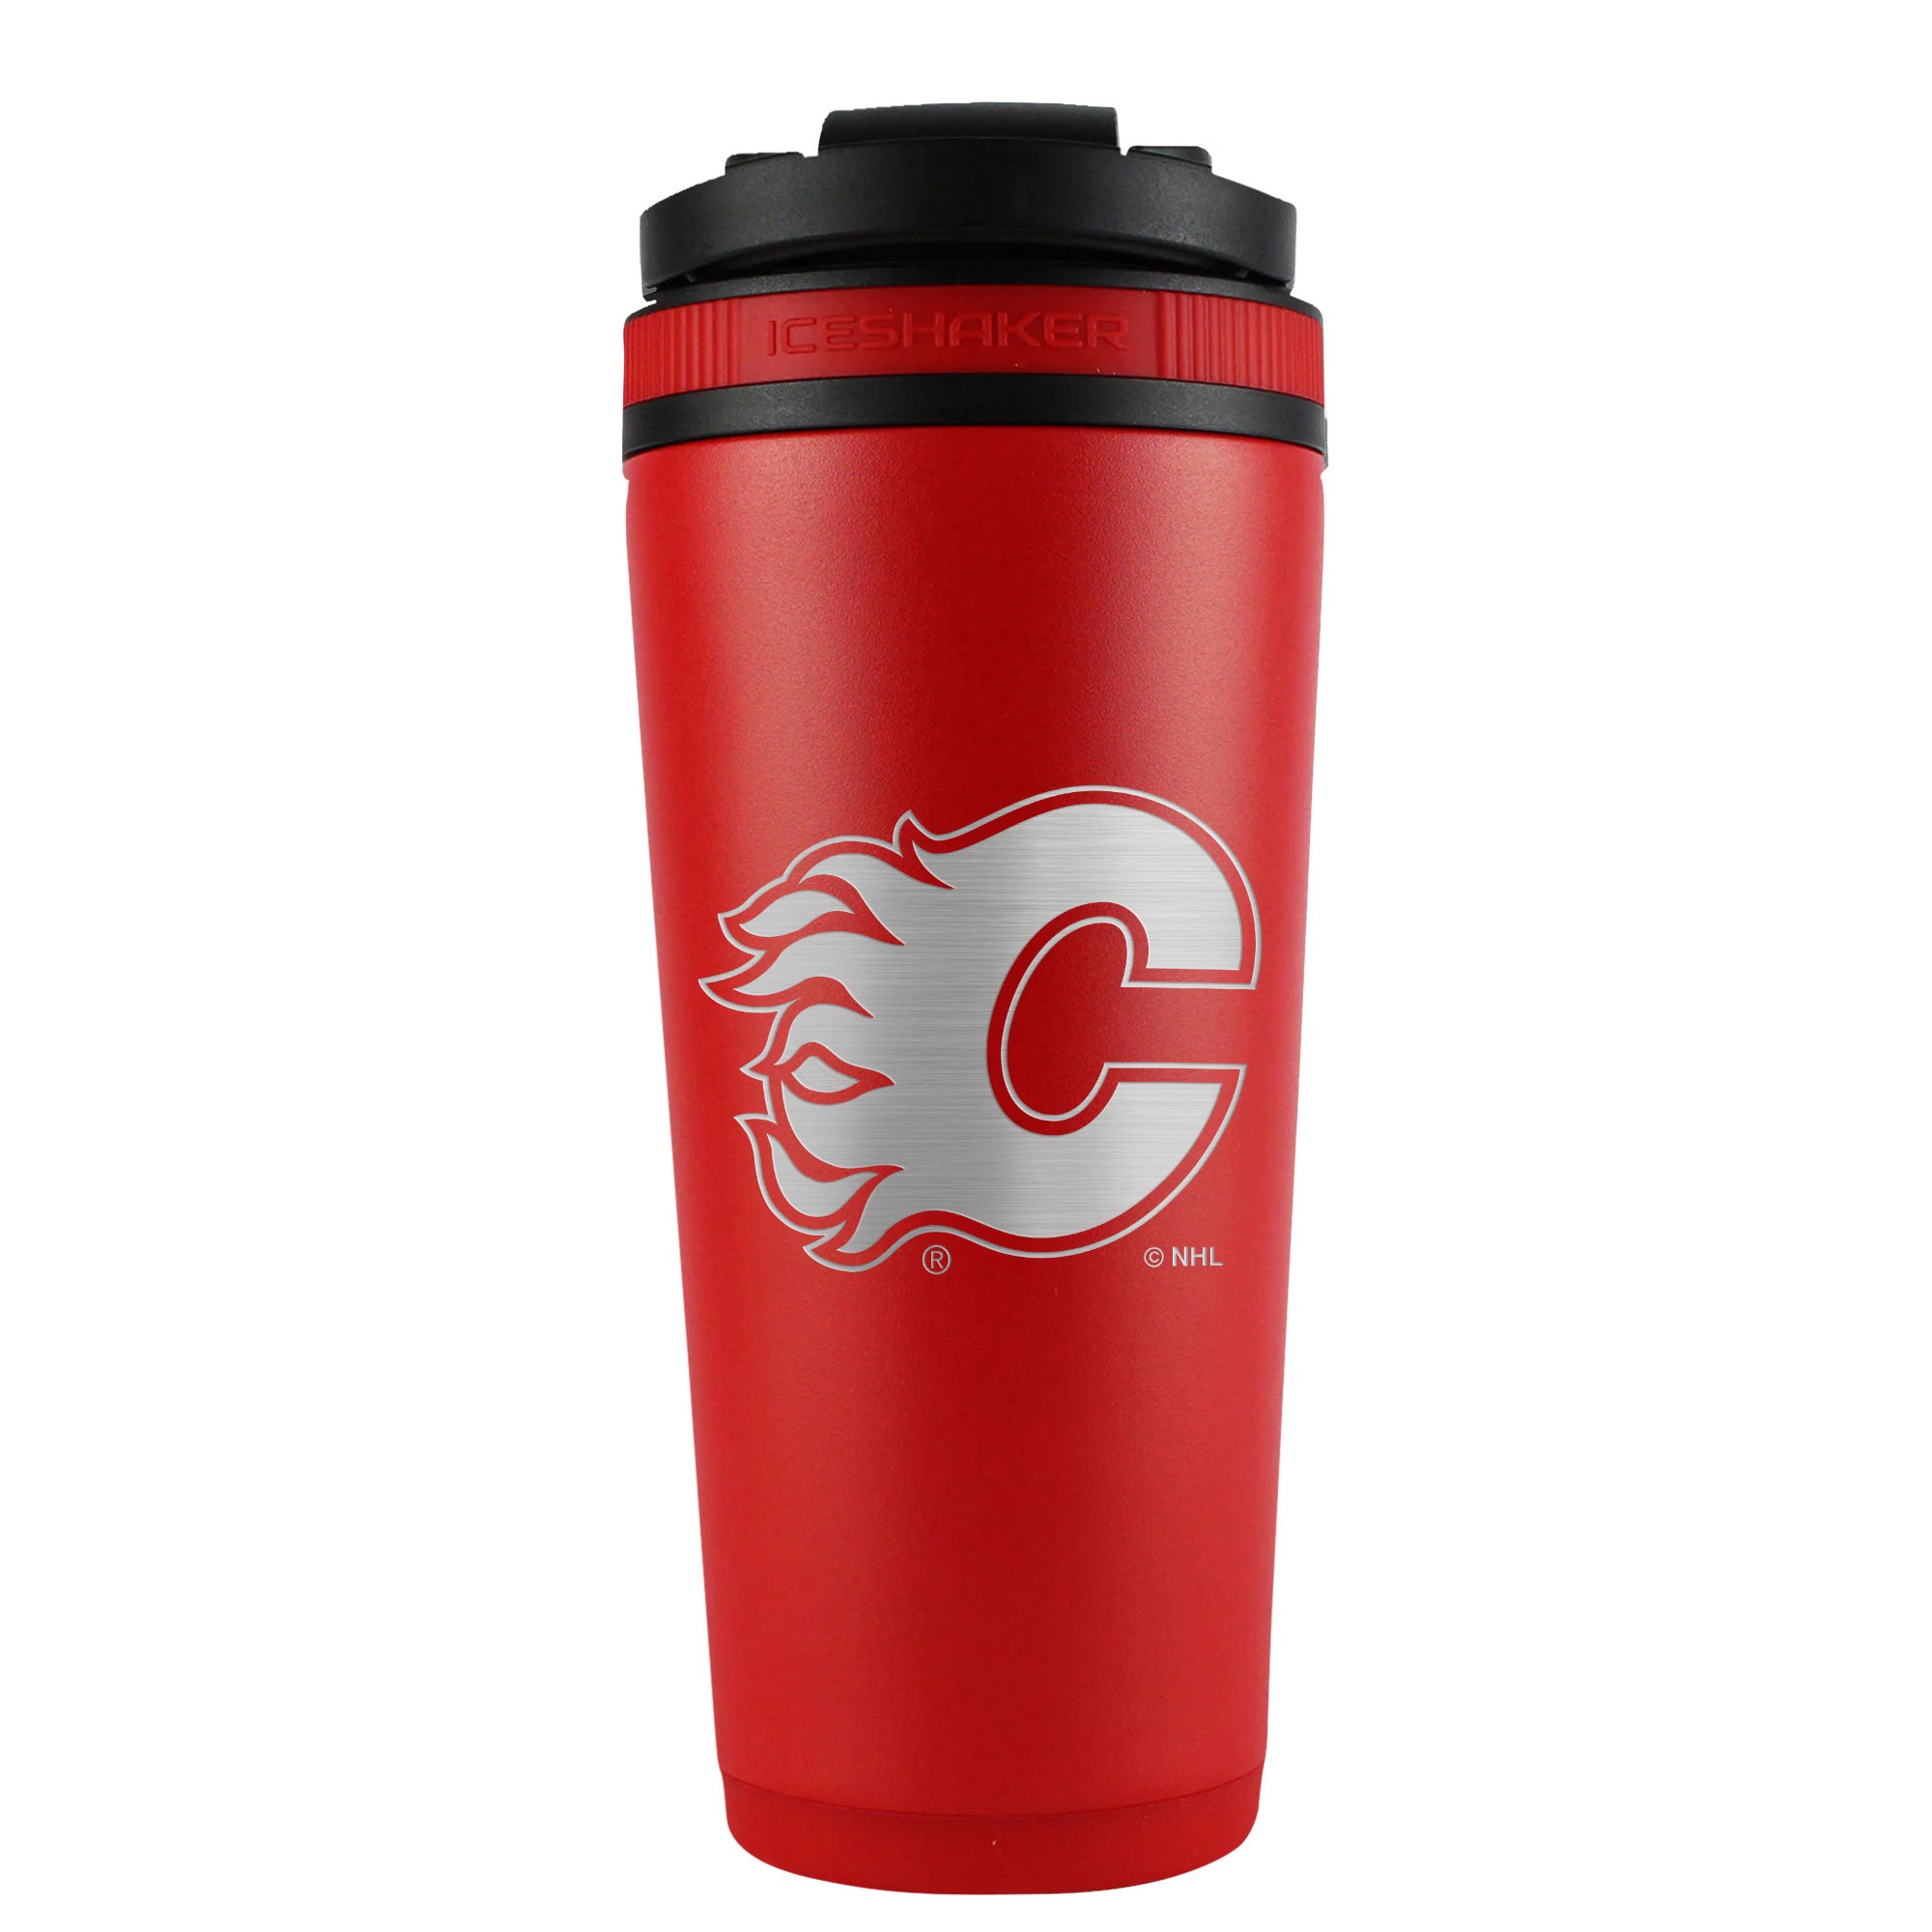 Officially Licensed Calgary Flames 26oz Ice Shaker - Red